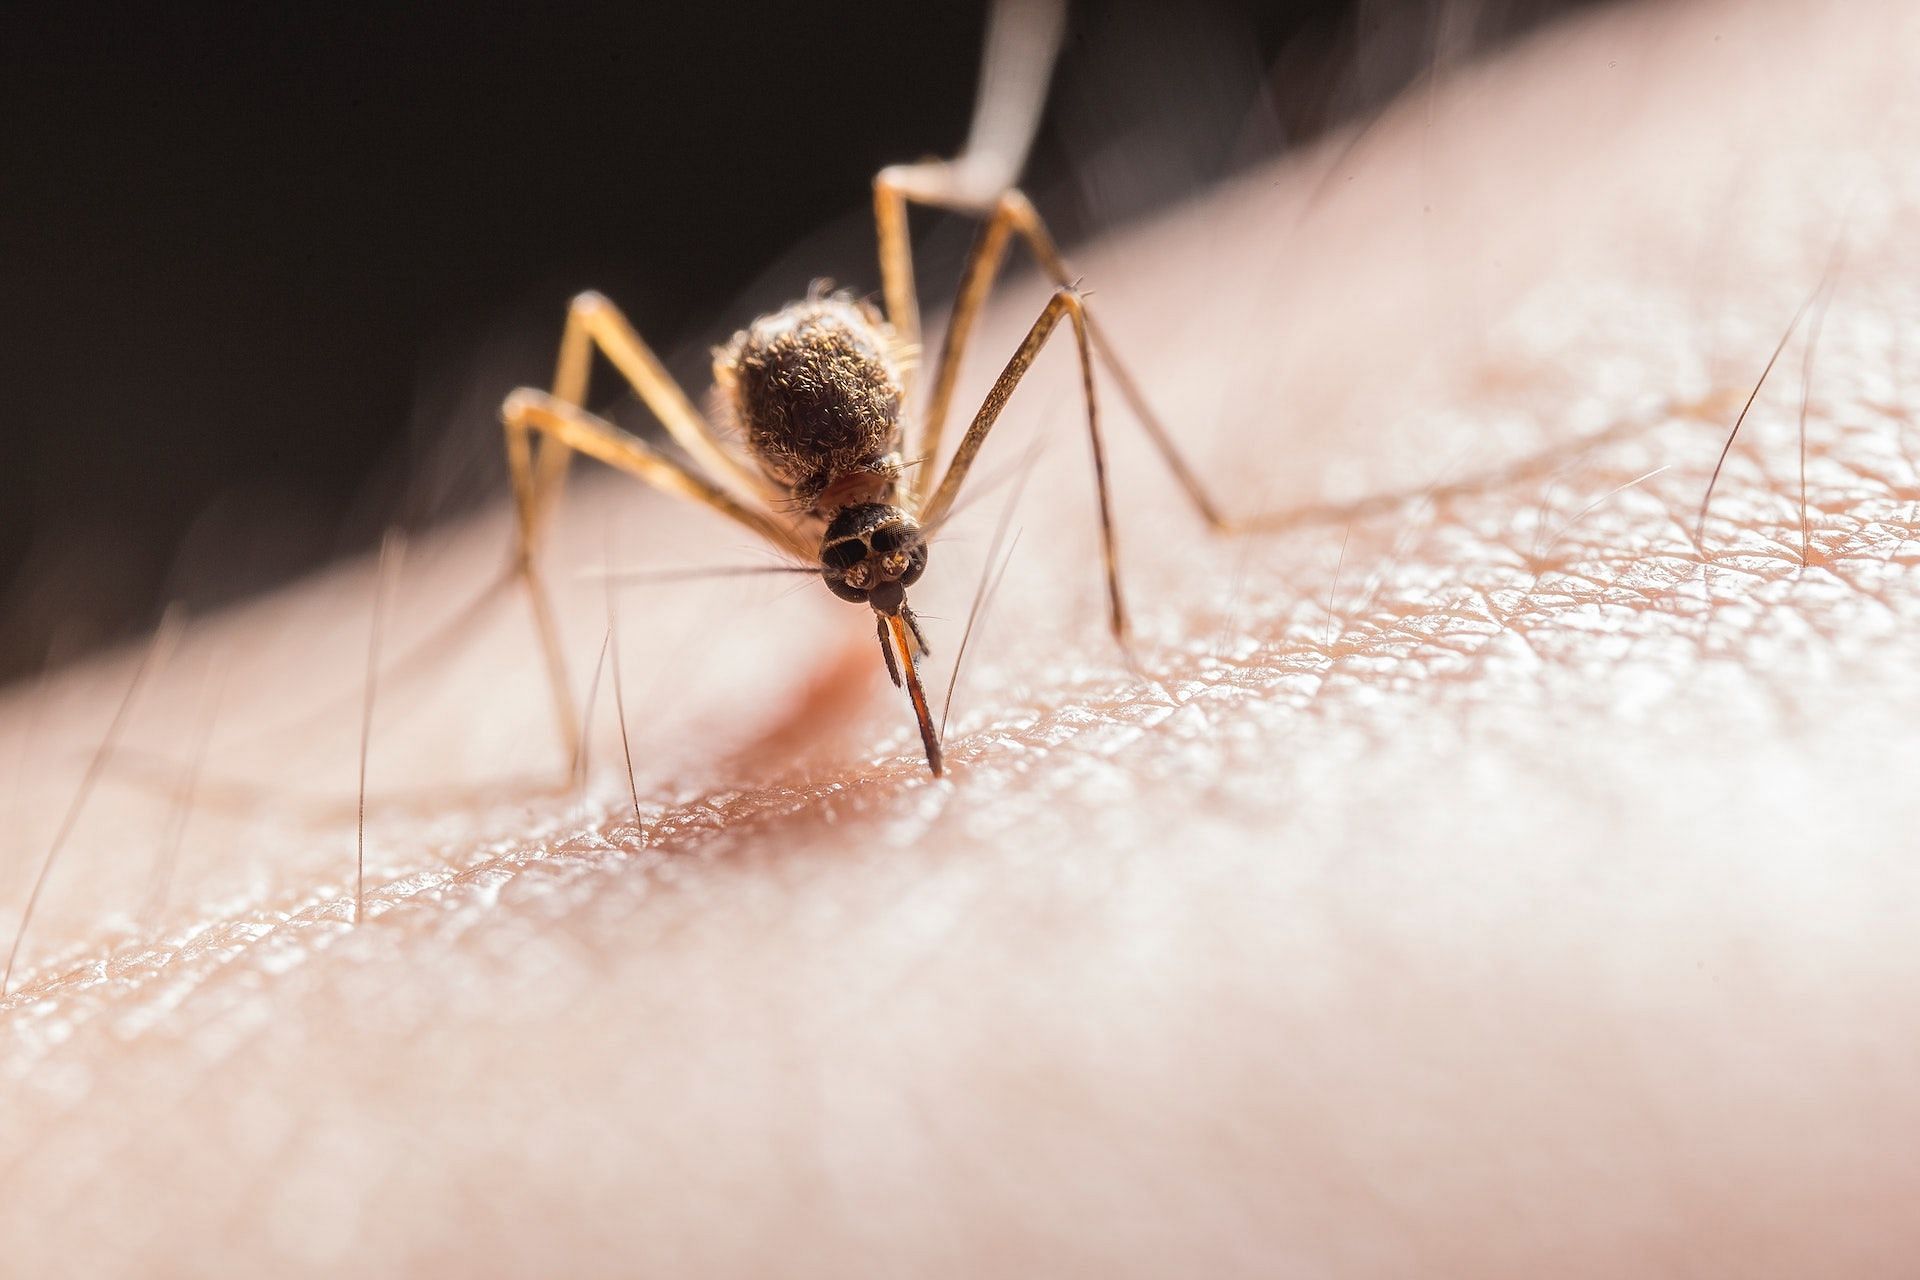 Insect bites can cause itchy skin. (Image via Pexels/Jimmy Chan)